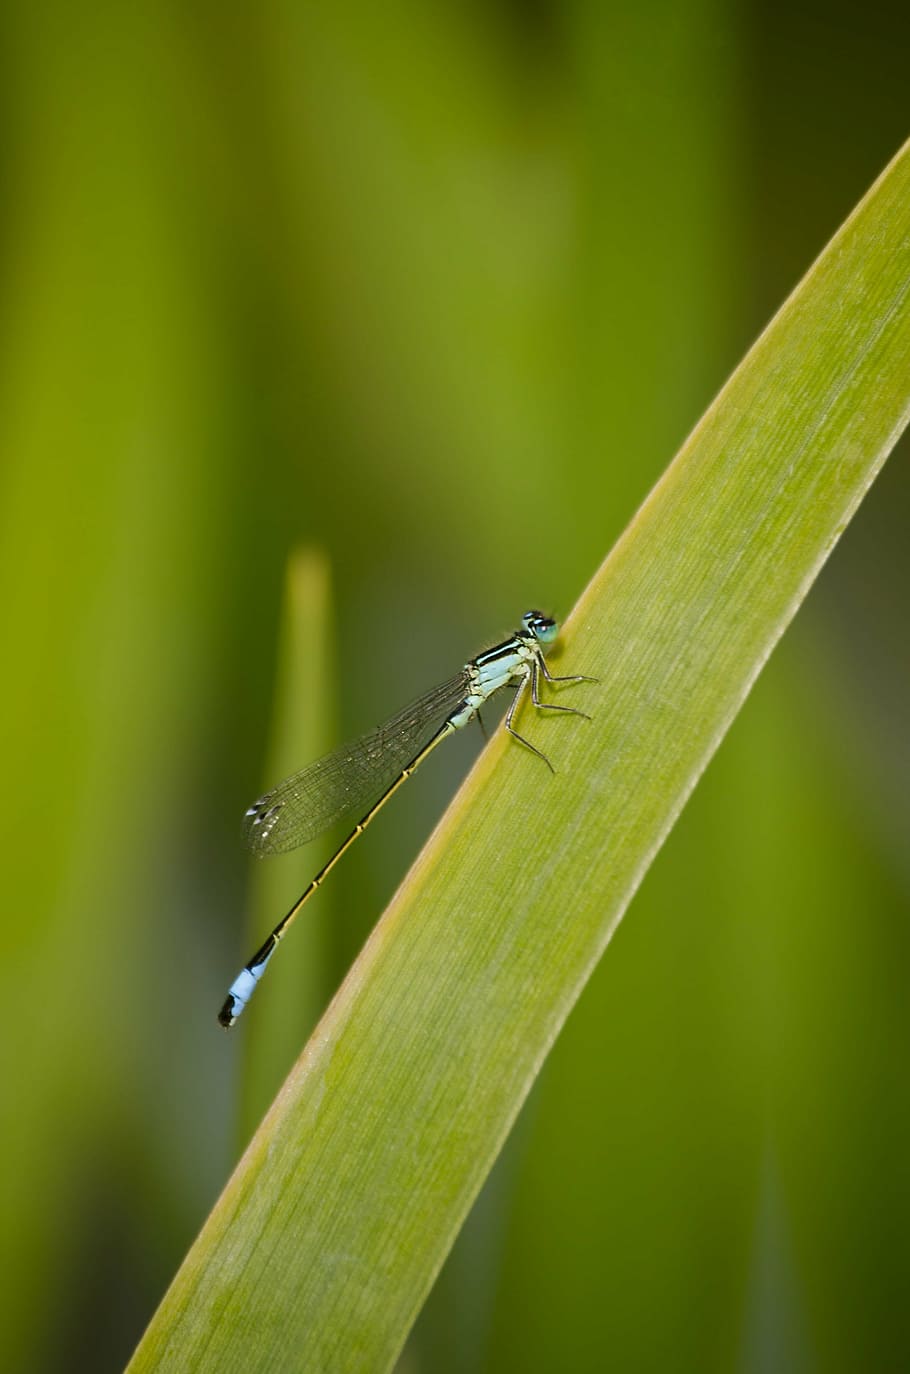 dragonfly, grass, reed, insect, wing, nature, flight insect, green, close, summer